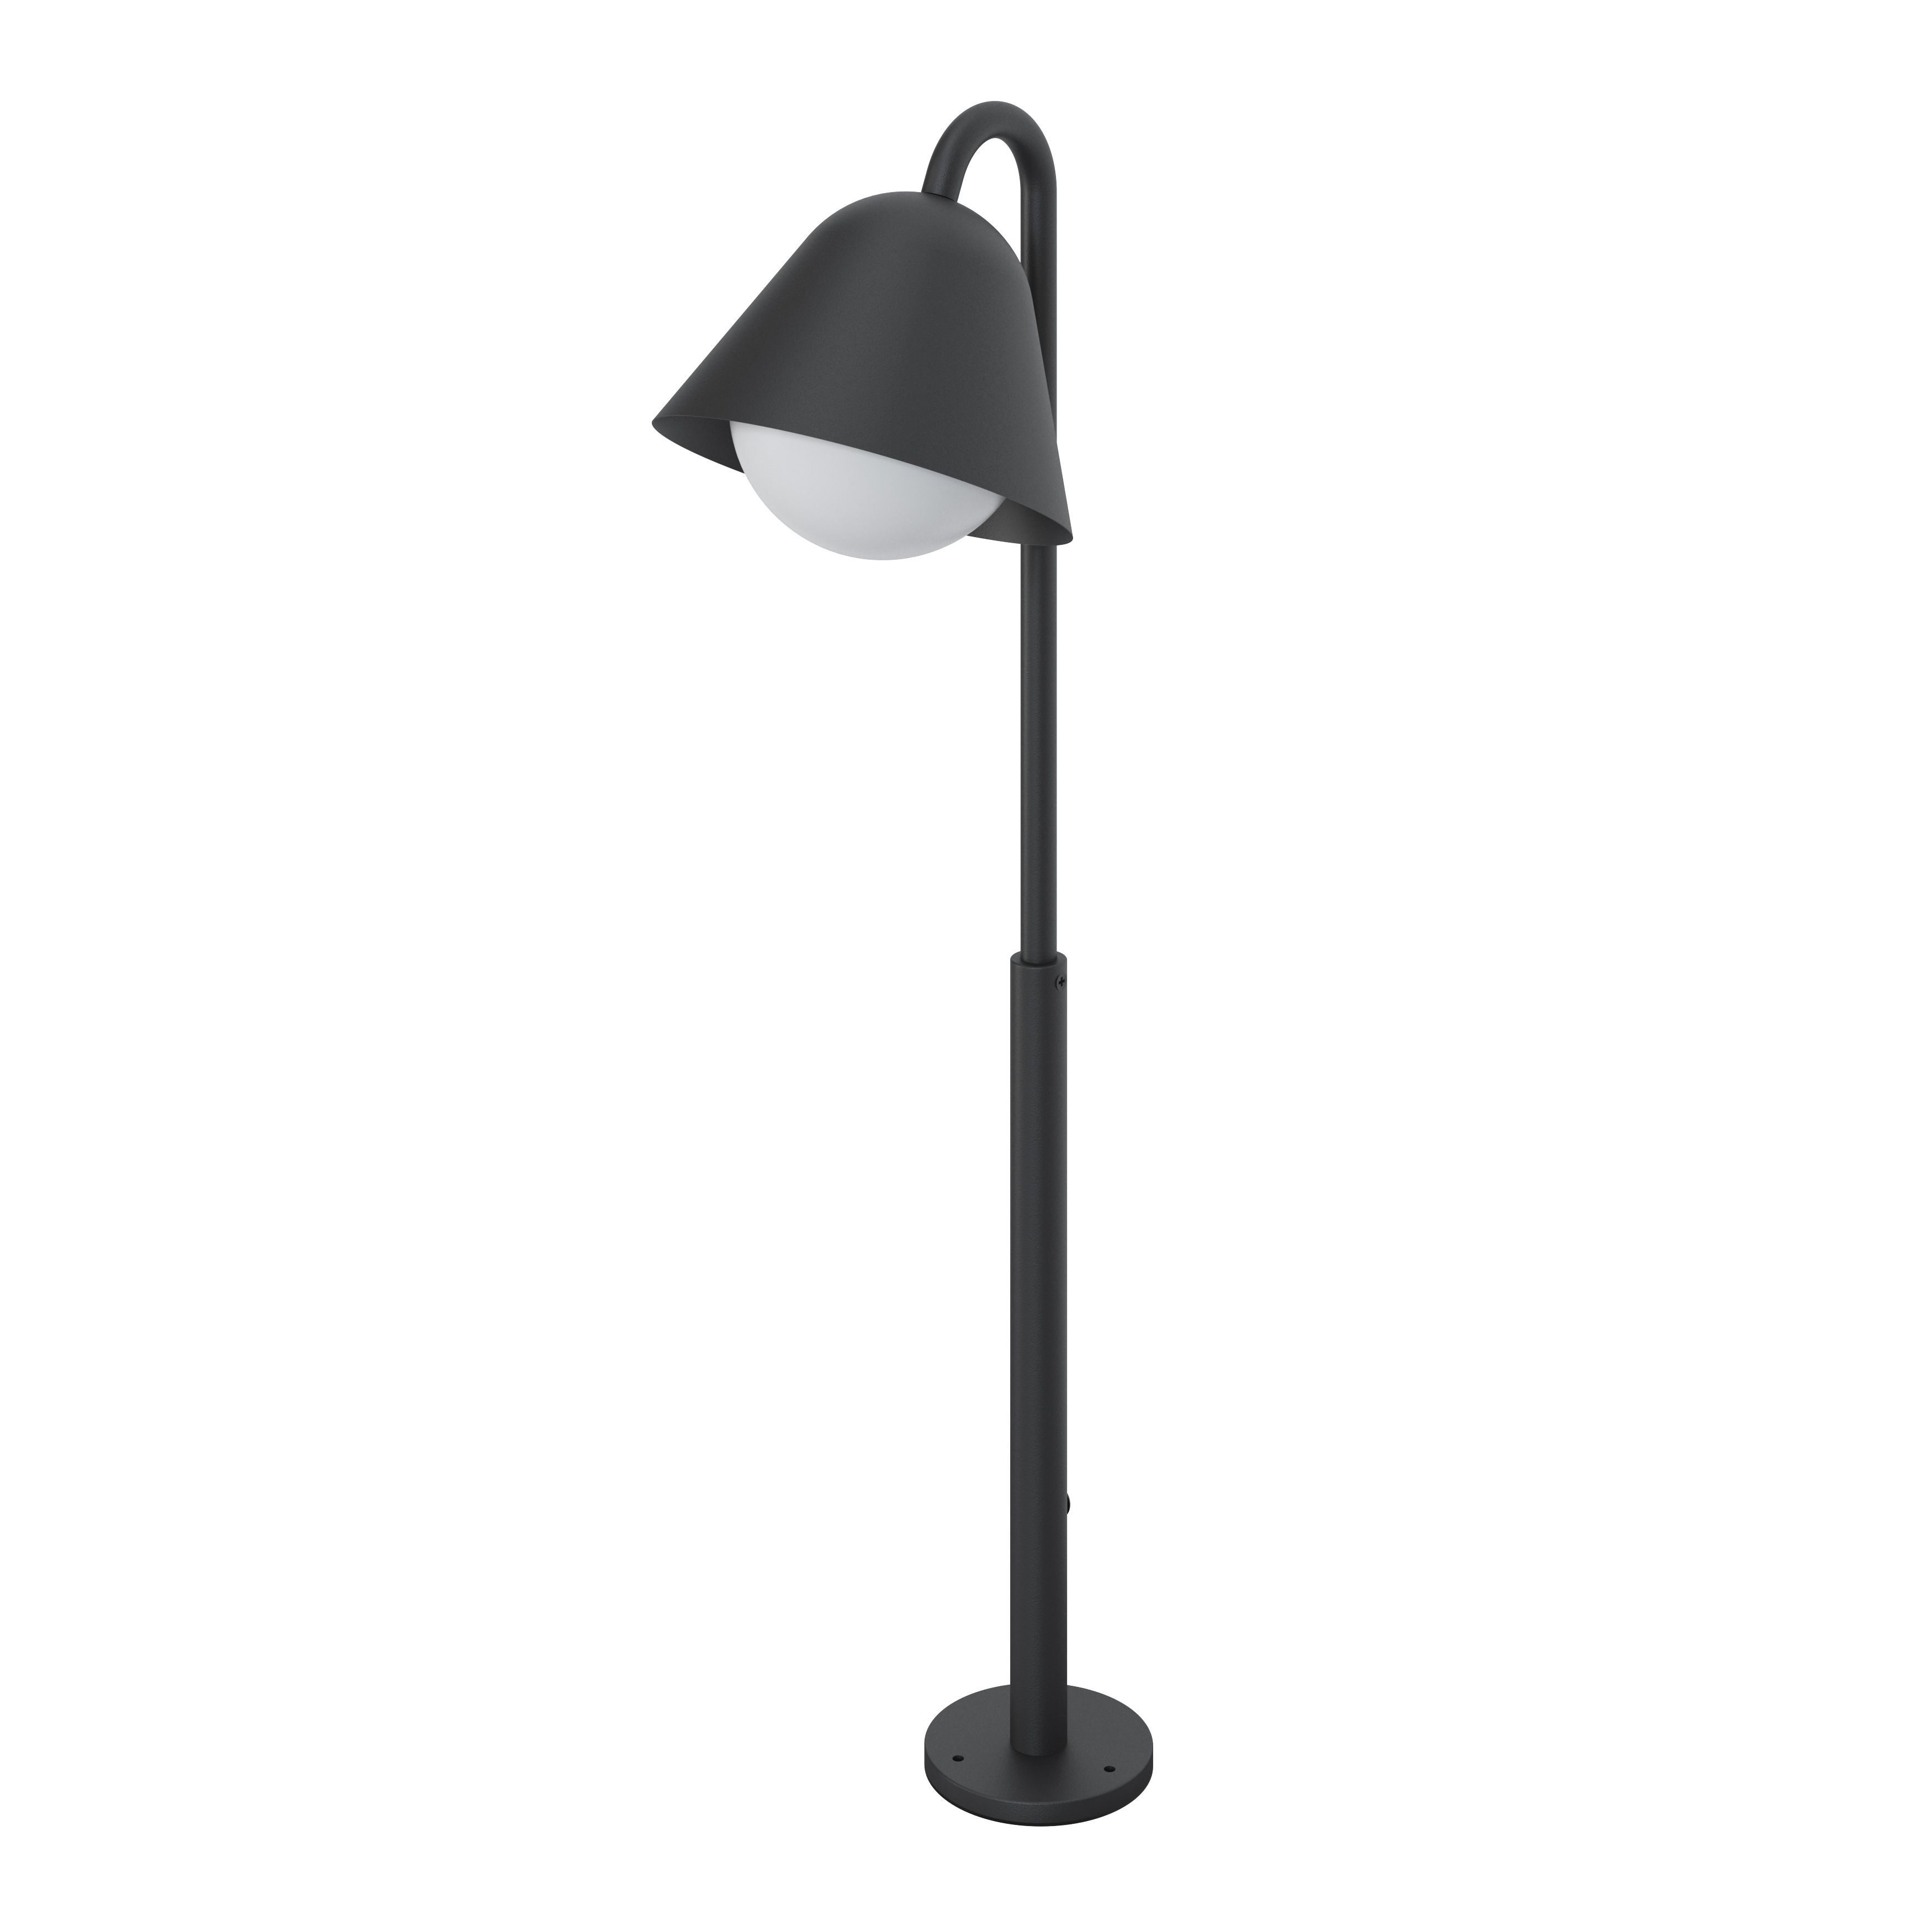 GoodHome Dark grey Mains-powered 1 lamp Integrated LED Outdoor Post light (H)730mm